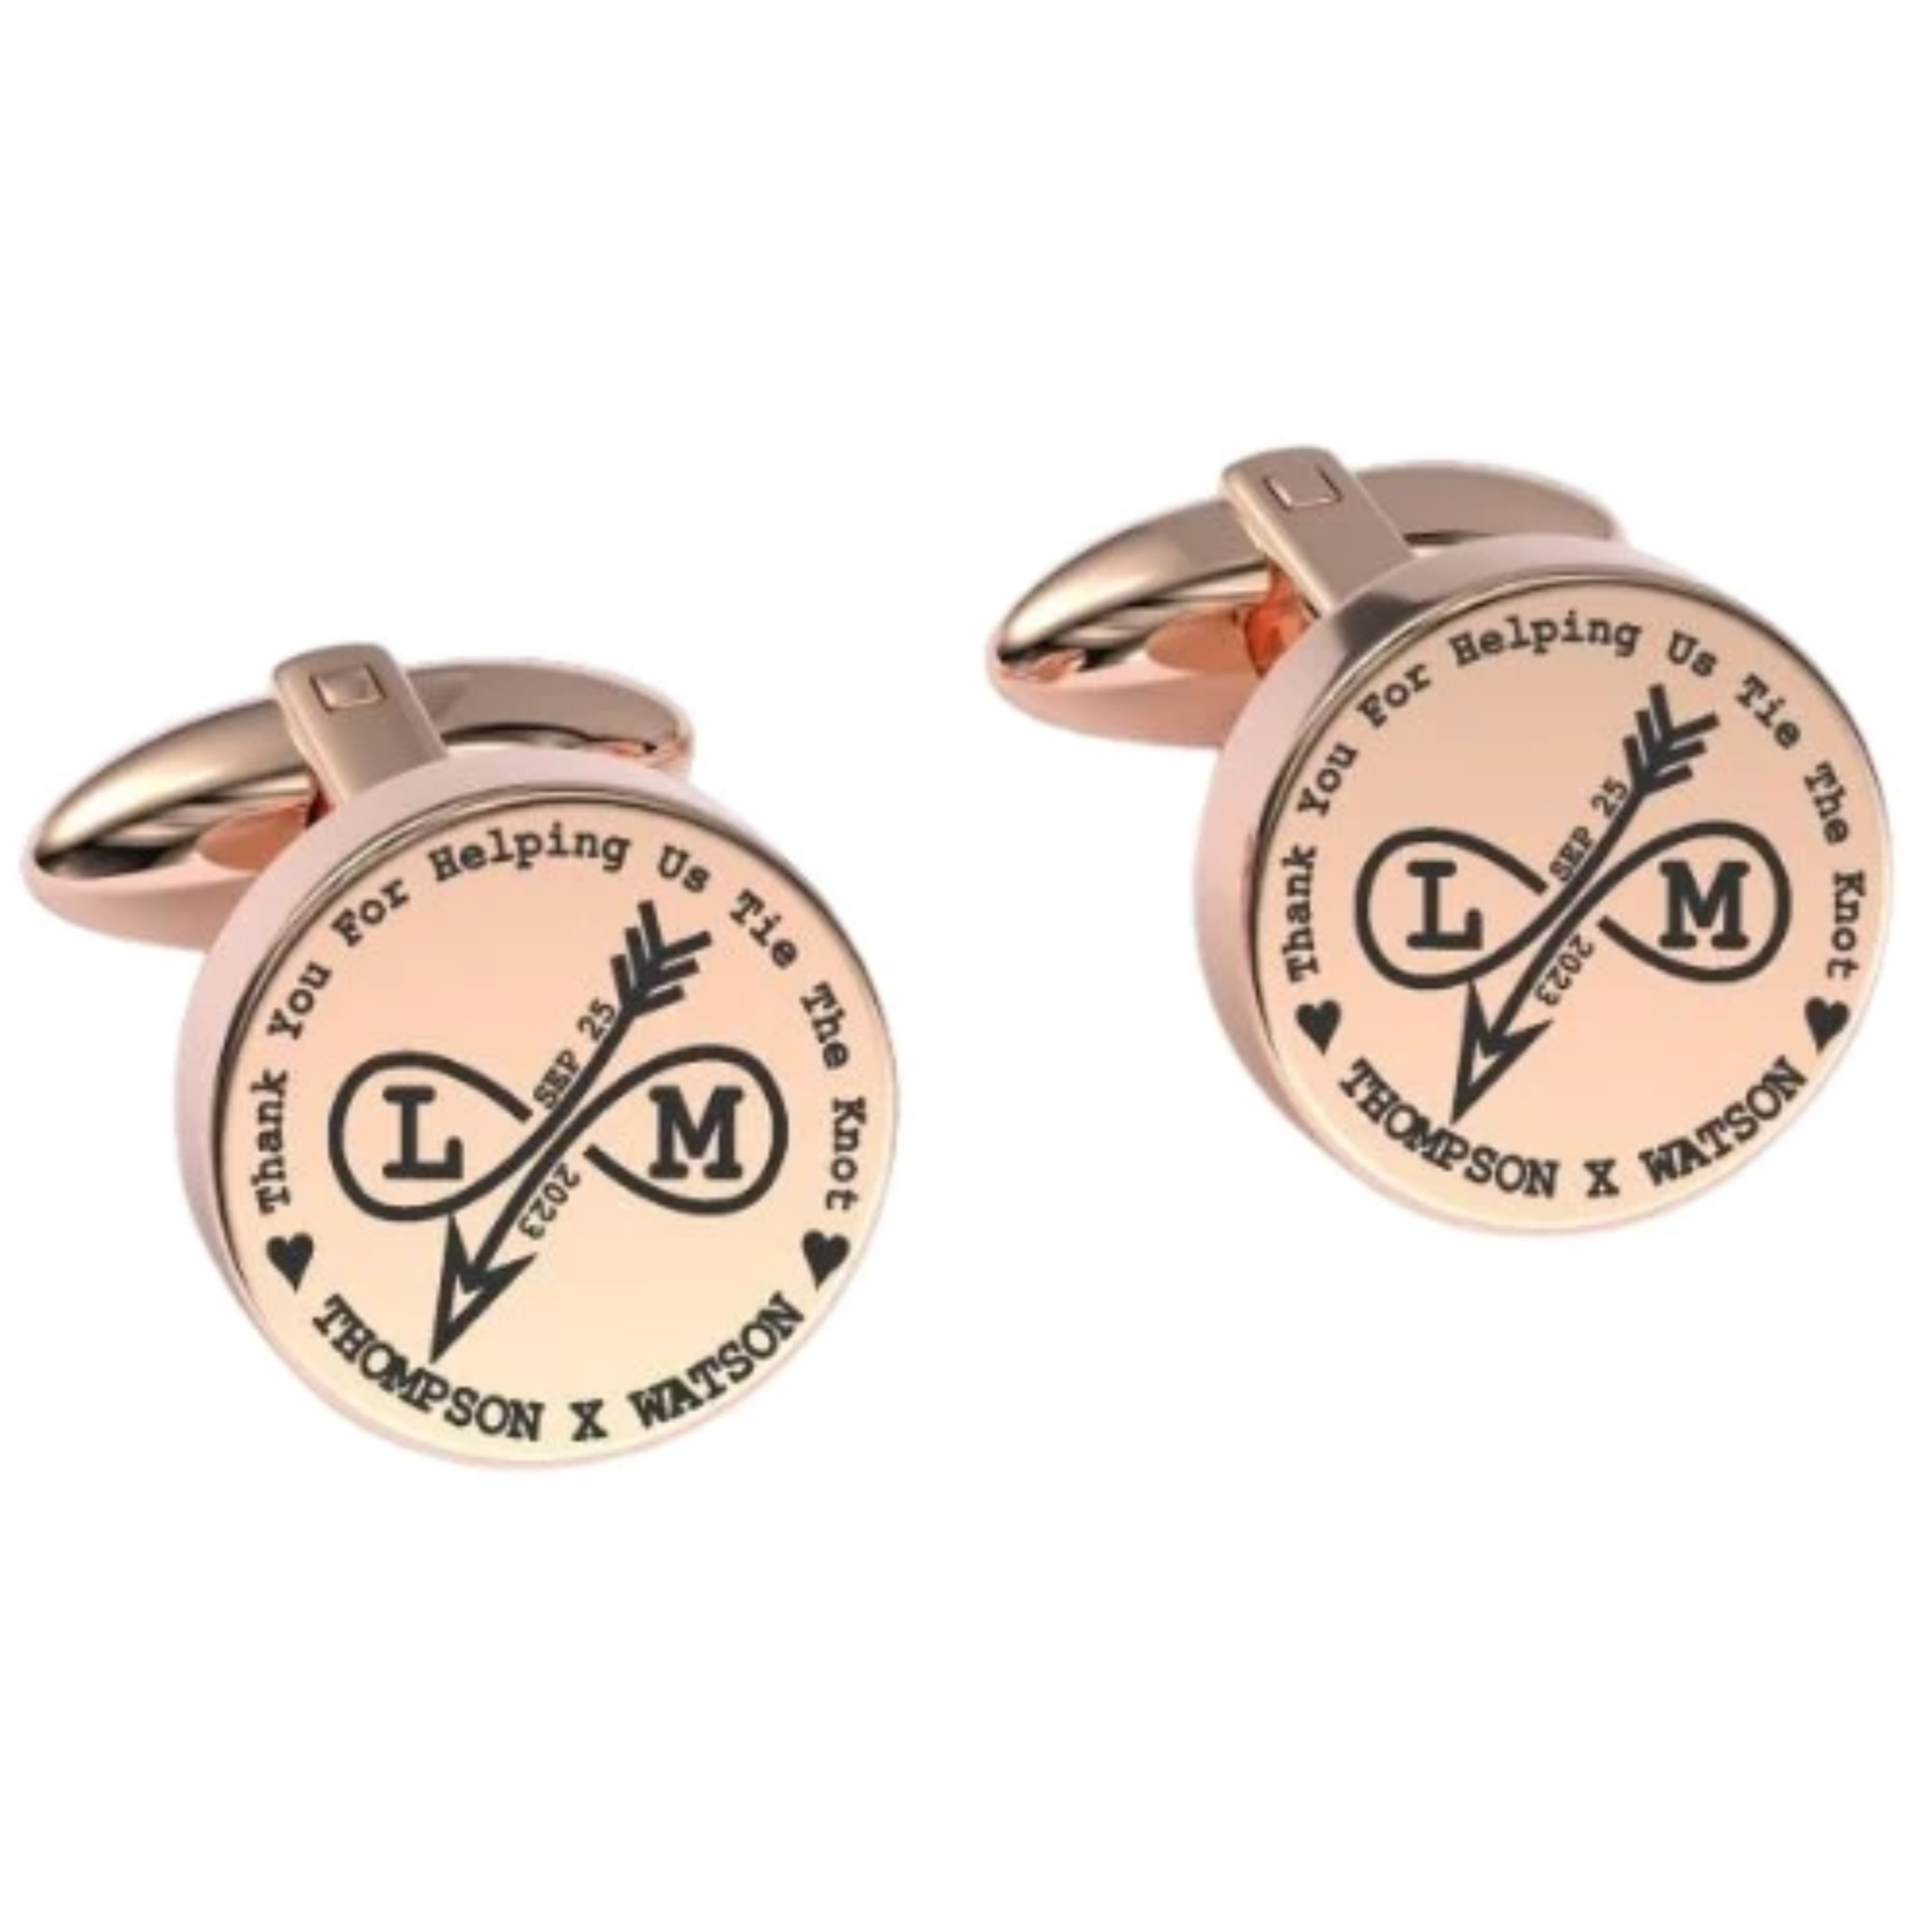 Tying The Knot Engraved Cufflinks in Rose Gold